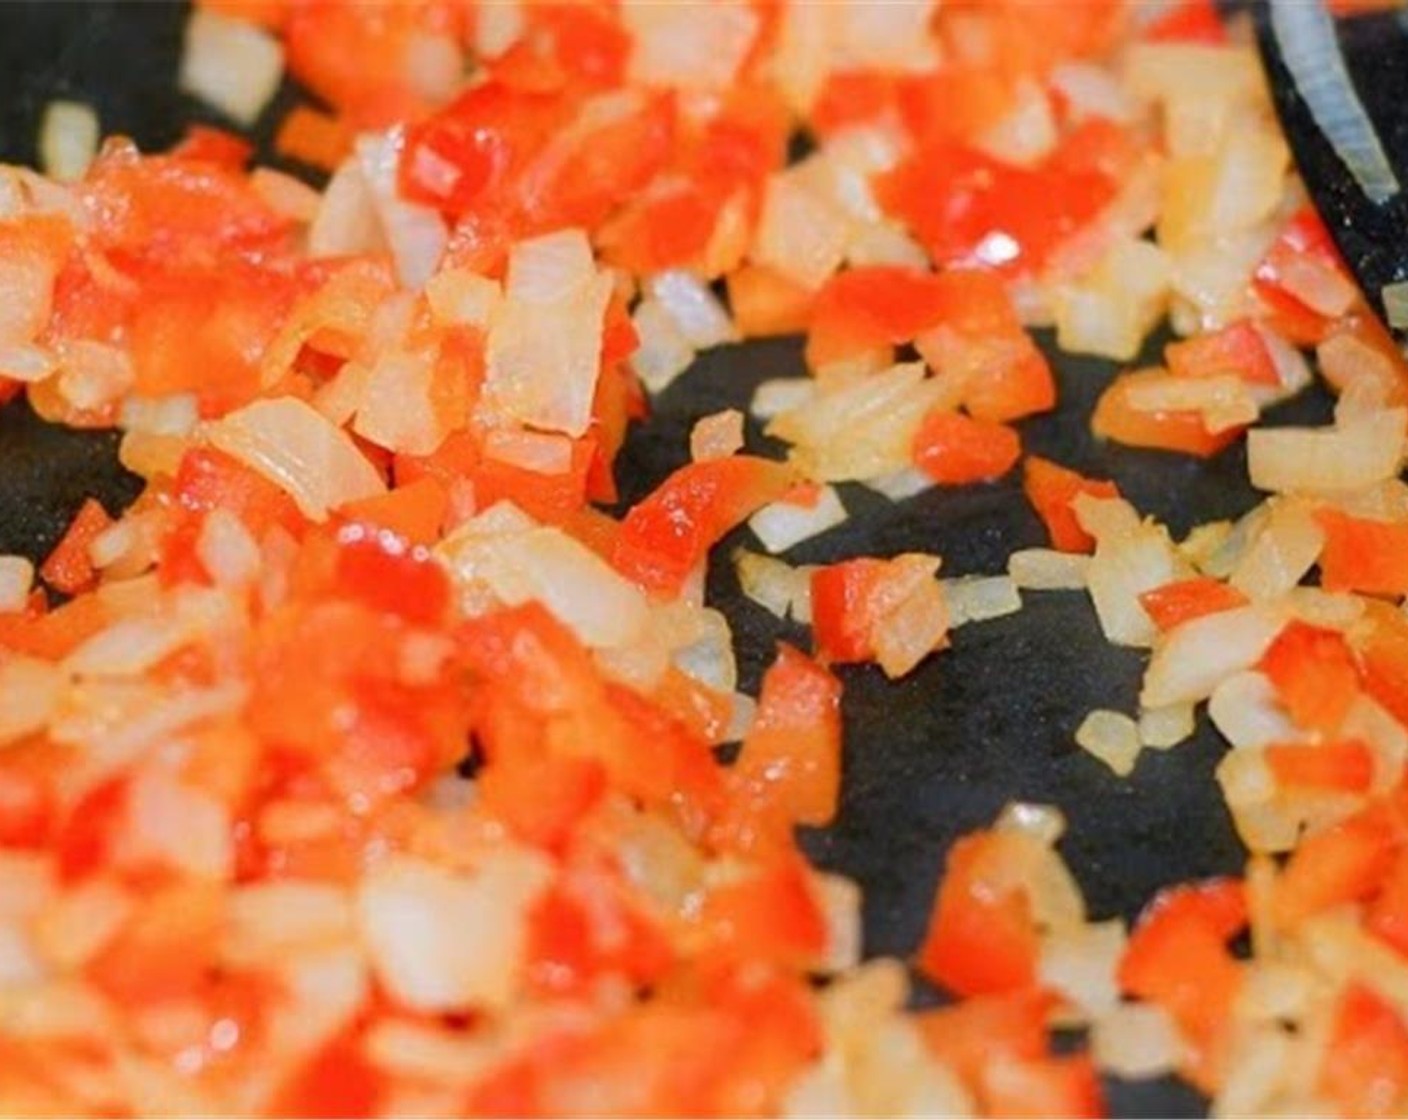 step 3 In a medium skillet over medium/medium low heat, add Vegetable Oil (1/2 Tbsp) and let warm up for 1-2 minutes. Add the finely chopped onion and red bell pepper and cook until soft, 6-8 minutes. Then remove from pan and set aside.